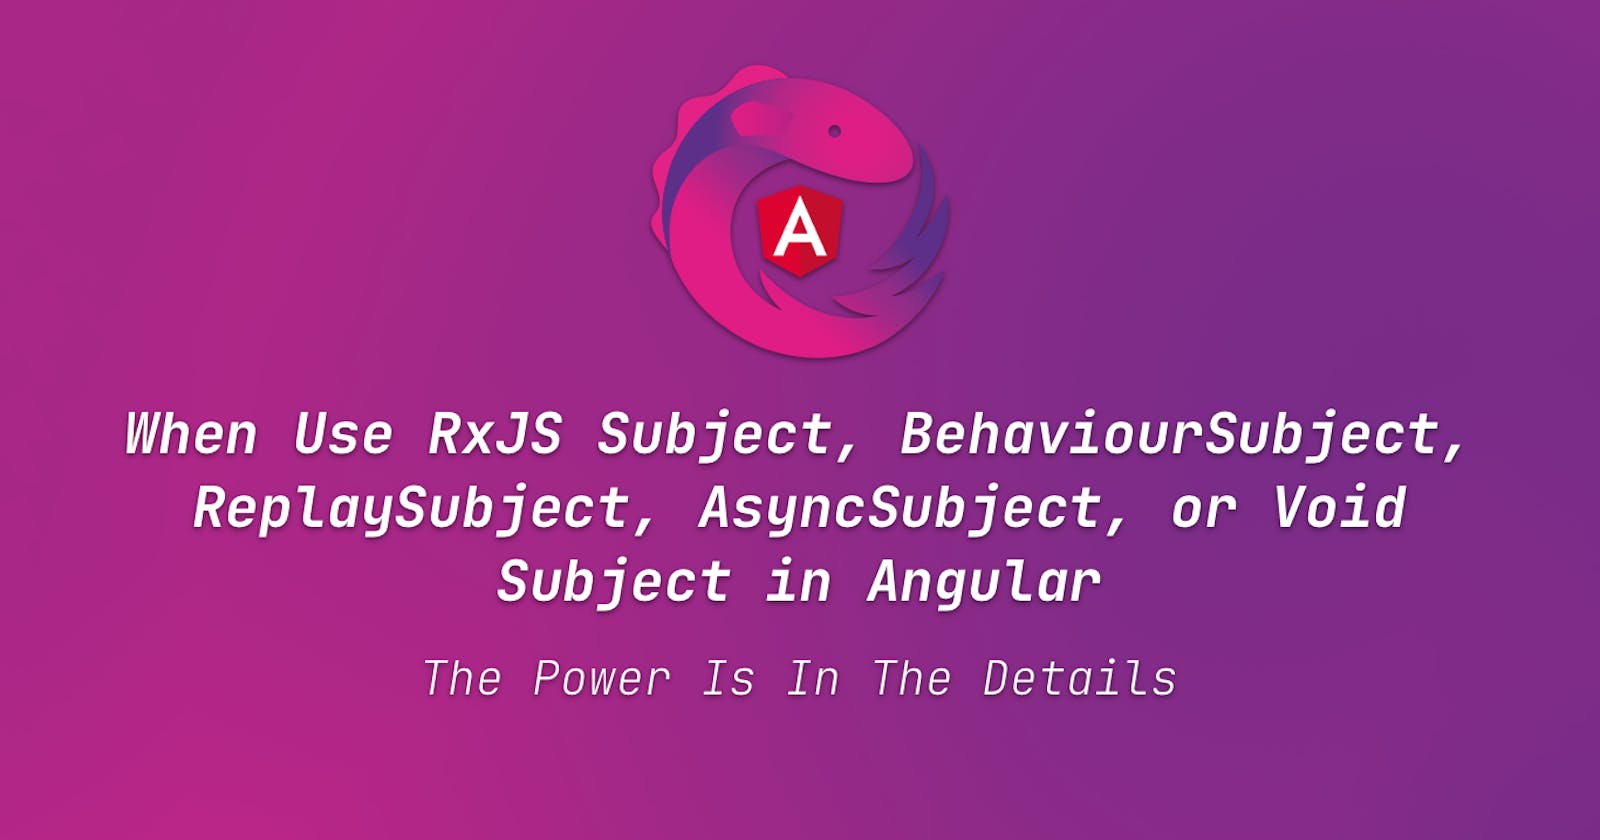 When Use RxJS Subject, BehaviourSubject, ReplaySubject, AsyncSubject, or Void Subject in Angular